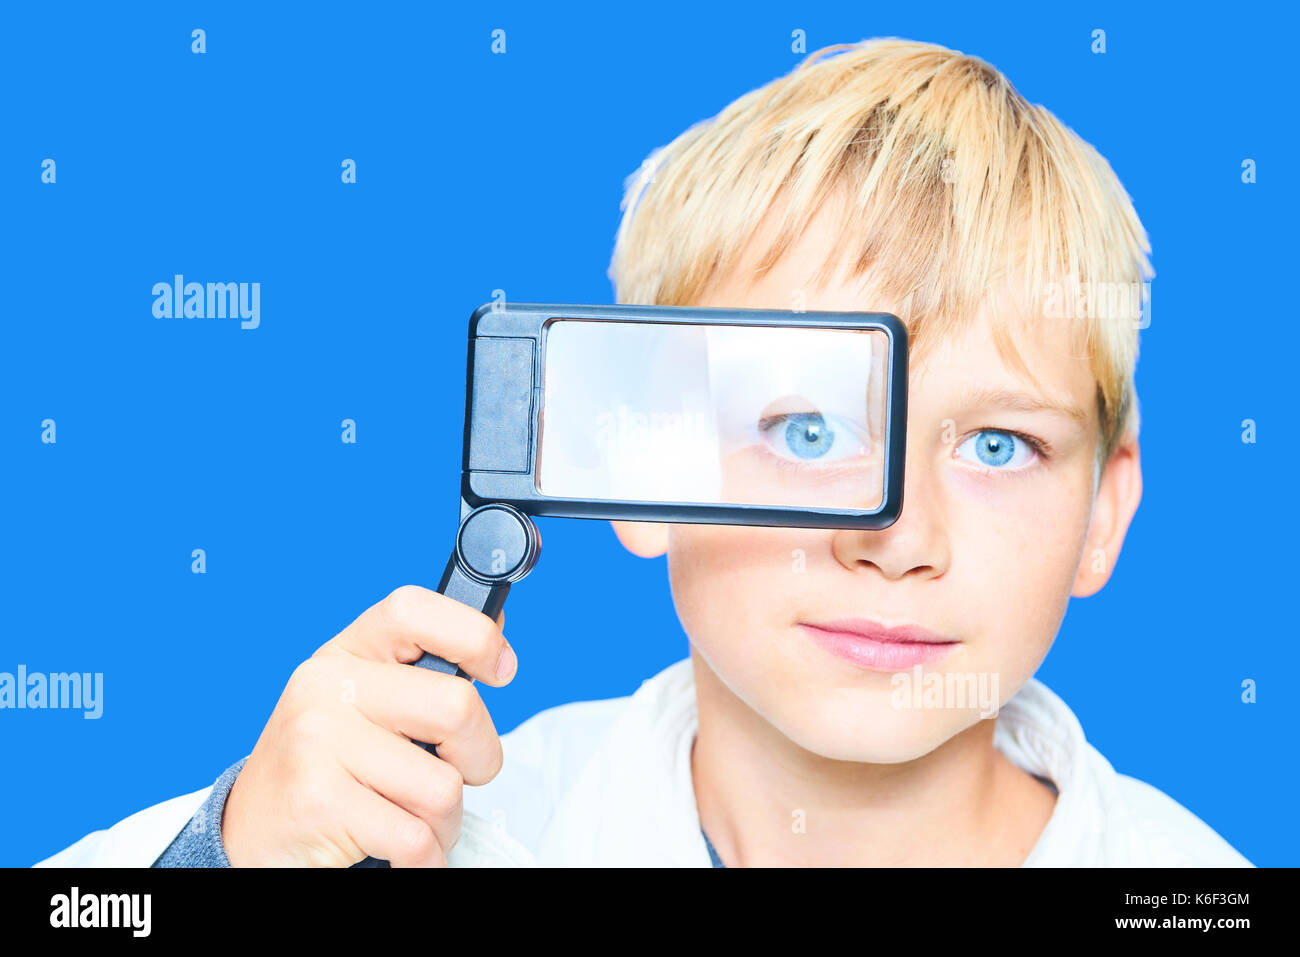 Portrait of Child Young Blond Boy using magnifying glass. Concept of crazy scientist. Isolated on blue keying background. Stock Photo